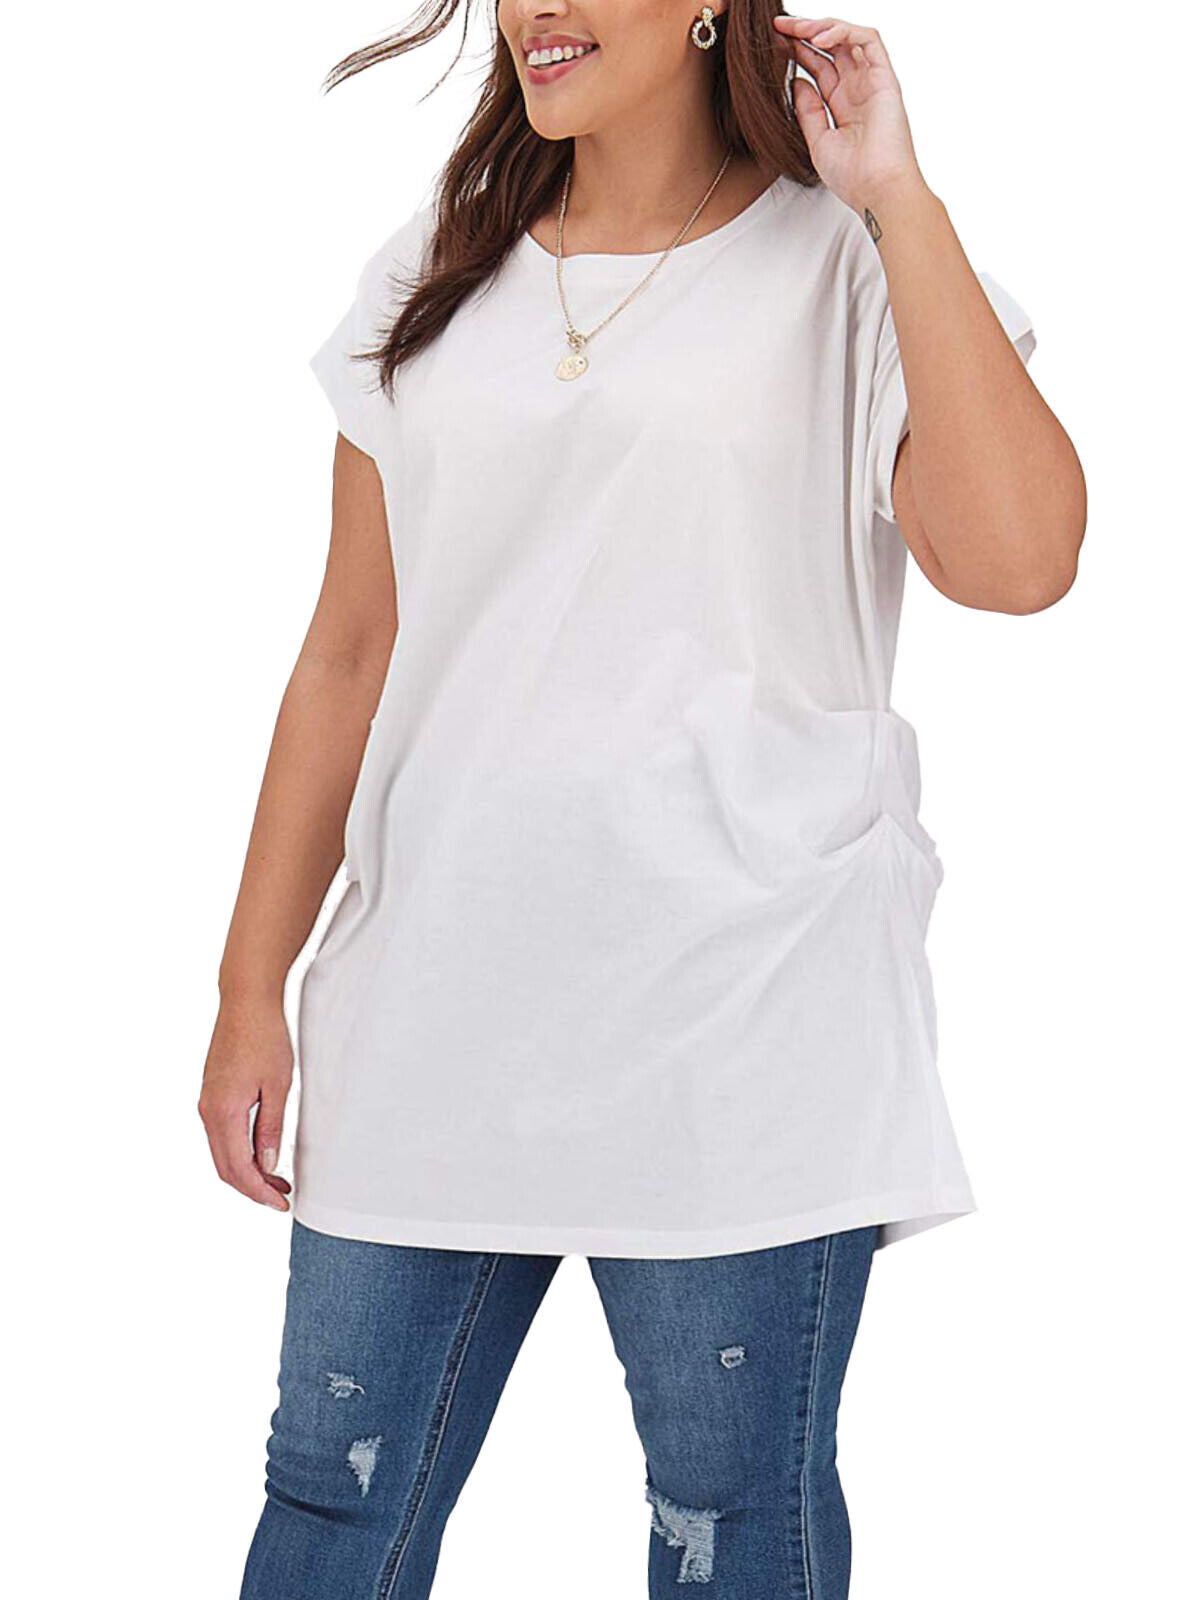 Simply Be White Oversized Draped T-Shirt in Sizes 16, 18, 20, 22, 26